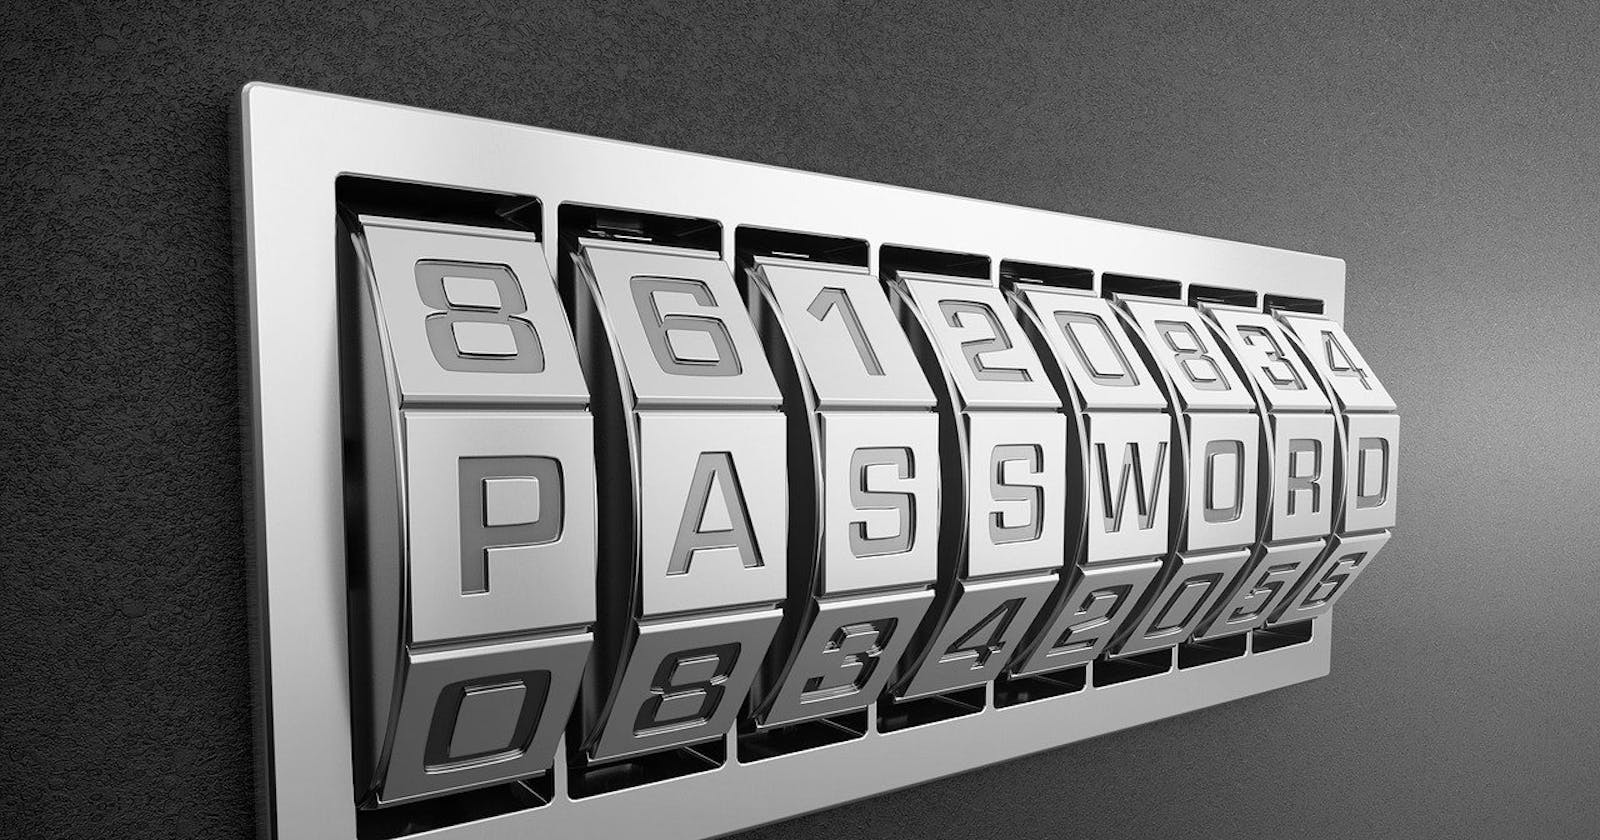 Why new passwords are so hard to create